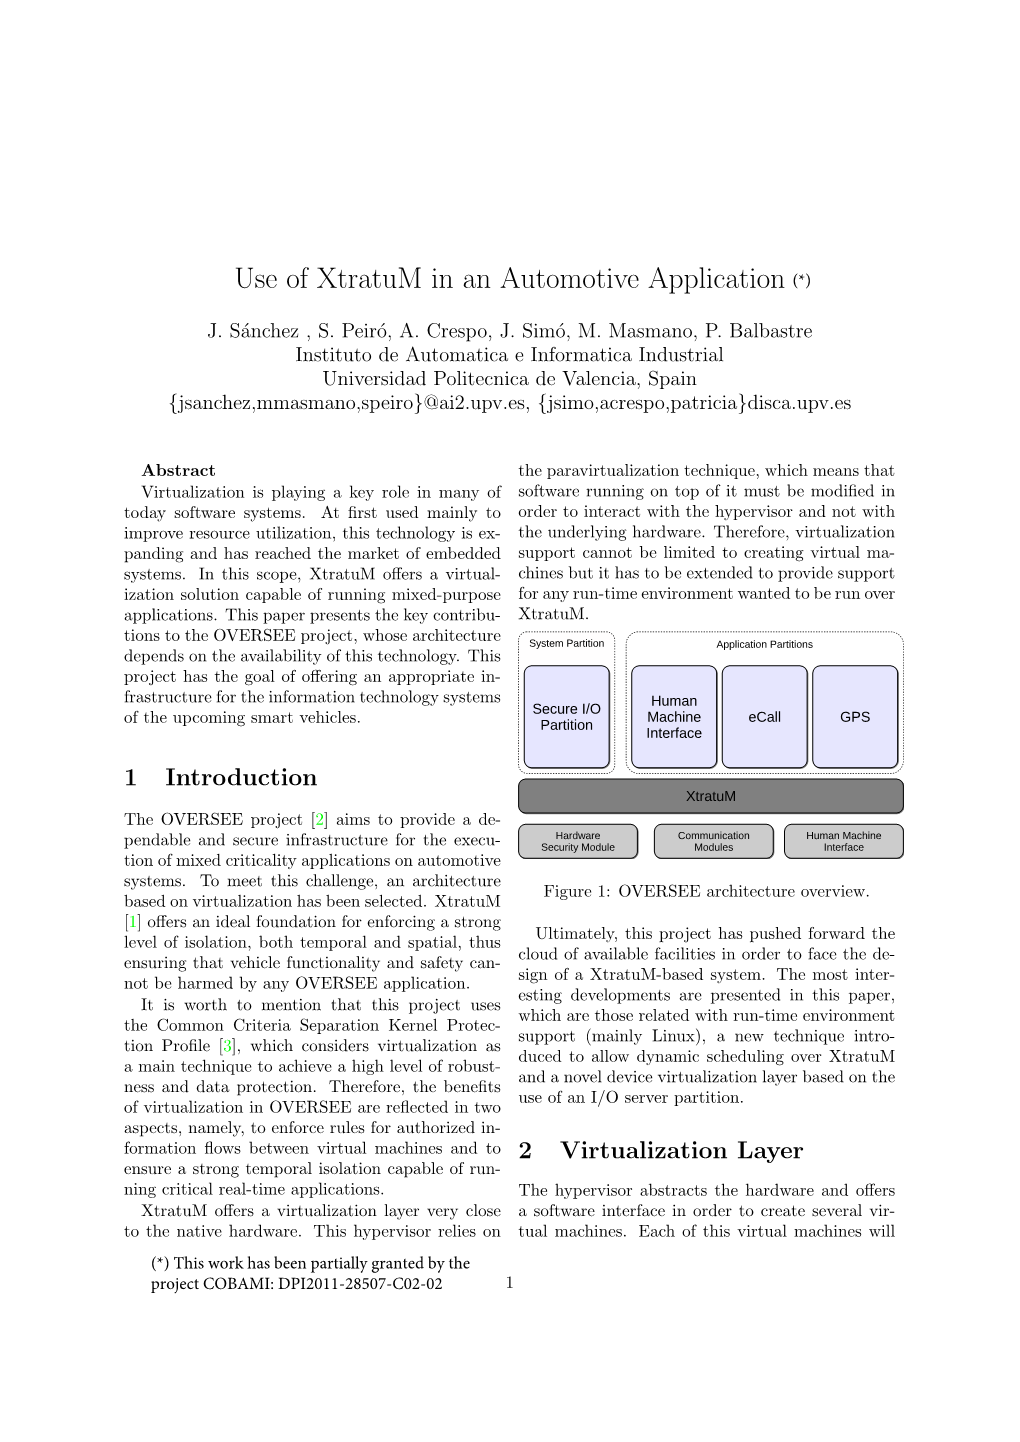 Use of Xtratum in an Automotive Application (*)